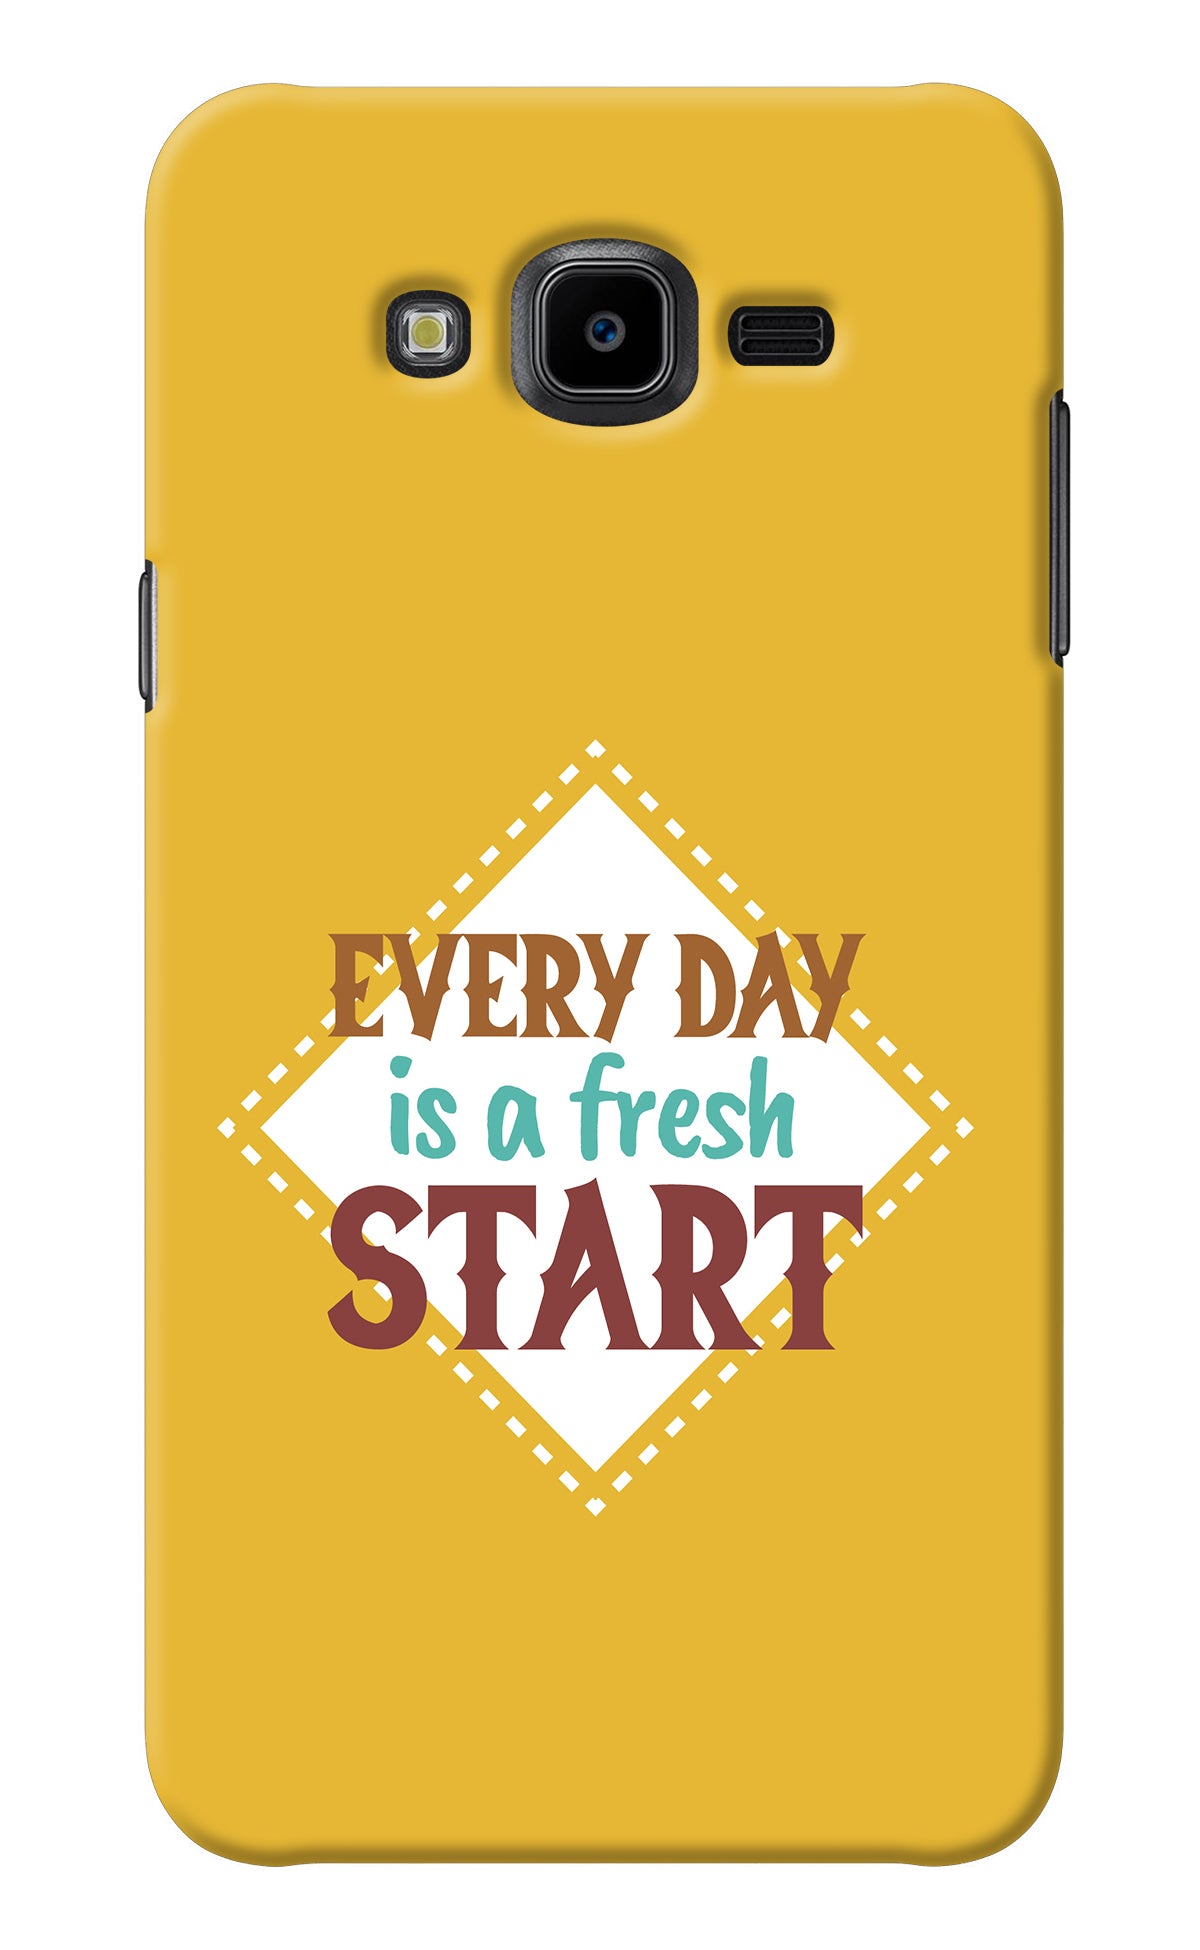 Every day is a Fresh Start Samsung J7 Nxt Back Cover